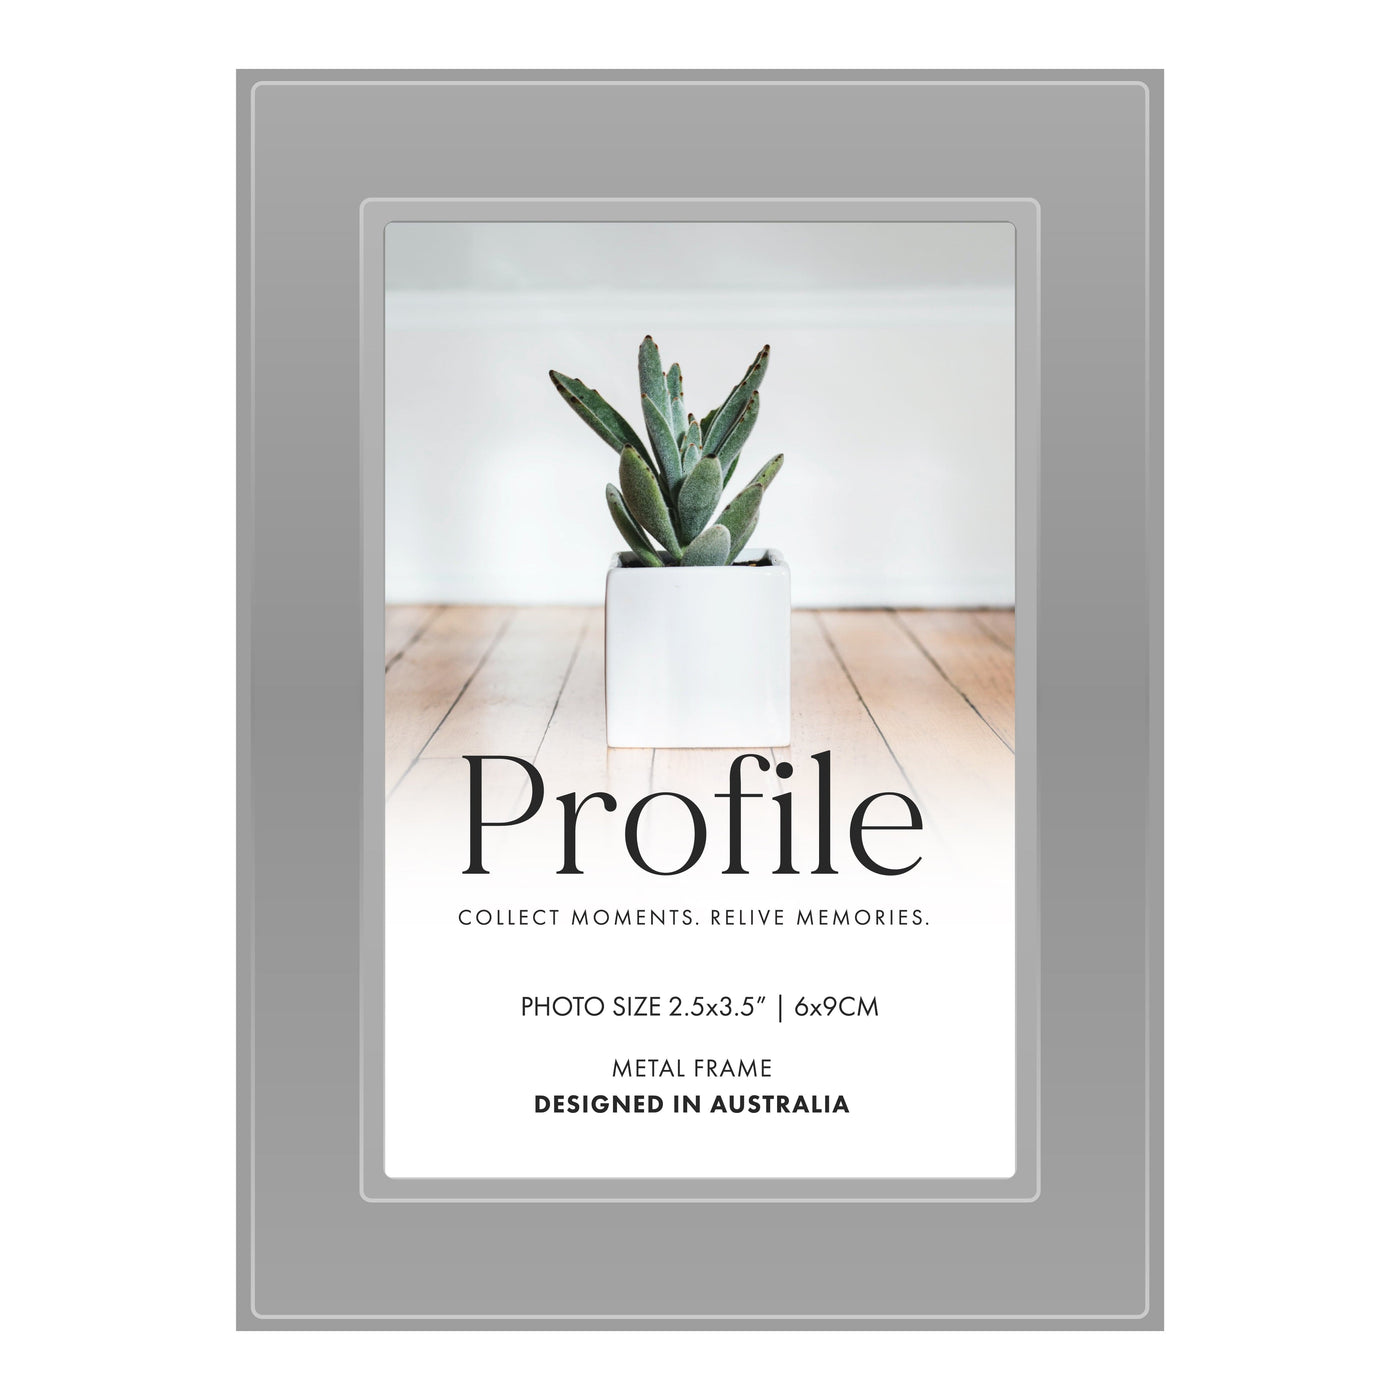 Eternal Silver Metal Photo Frame 2.5x3.5in (6x9cm) from our Metal Photo Frames collection by Profile Products Australia